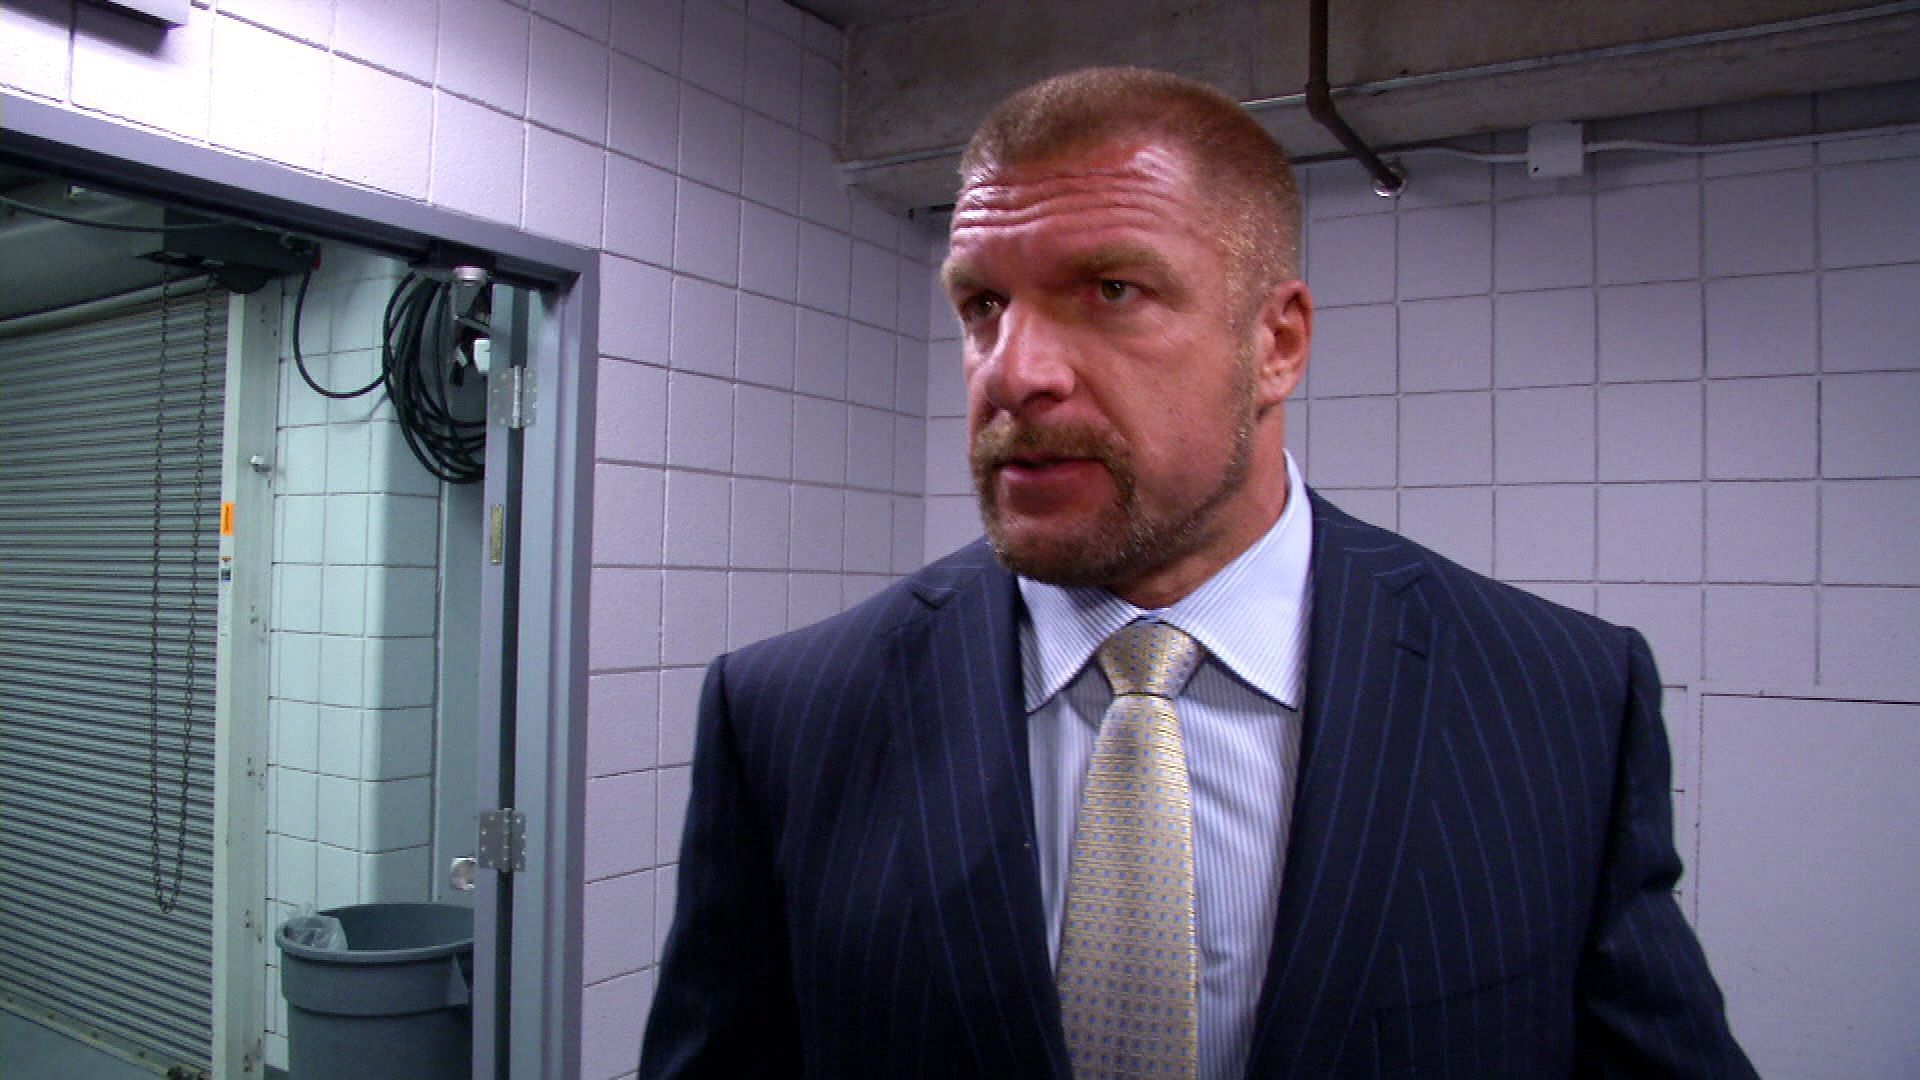 HHH has been on a signing spree since gaining power.